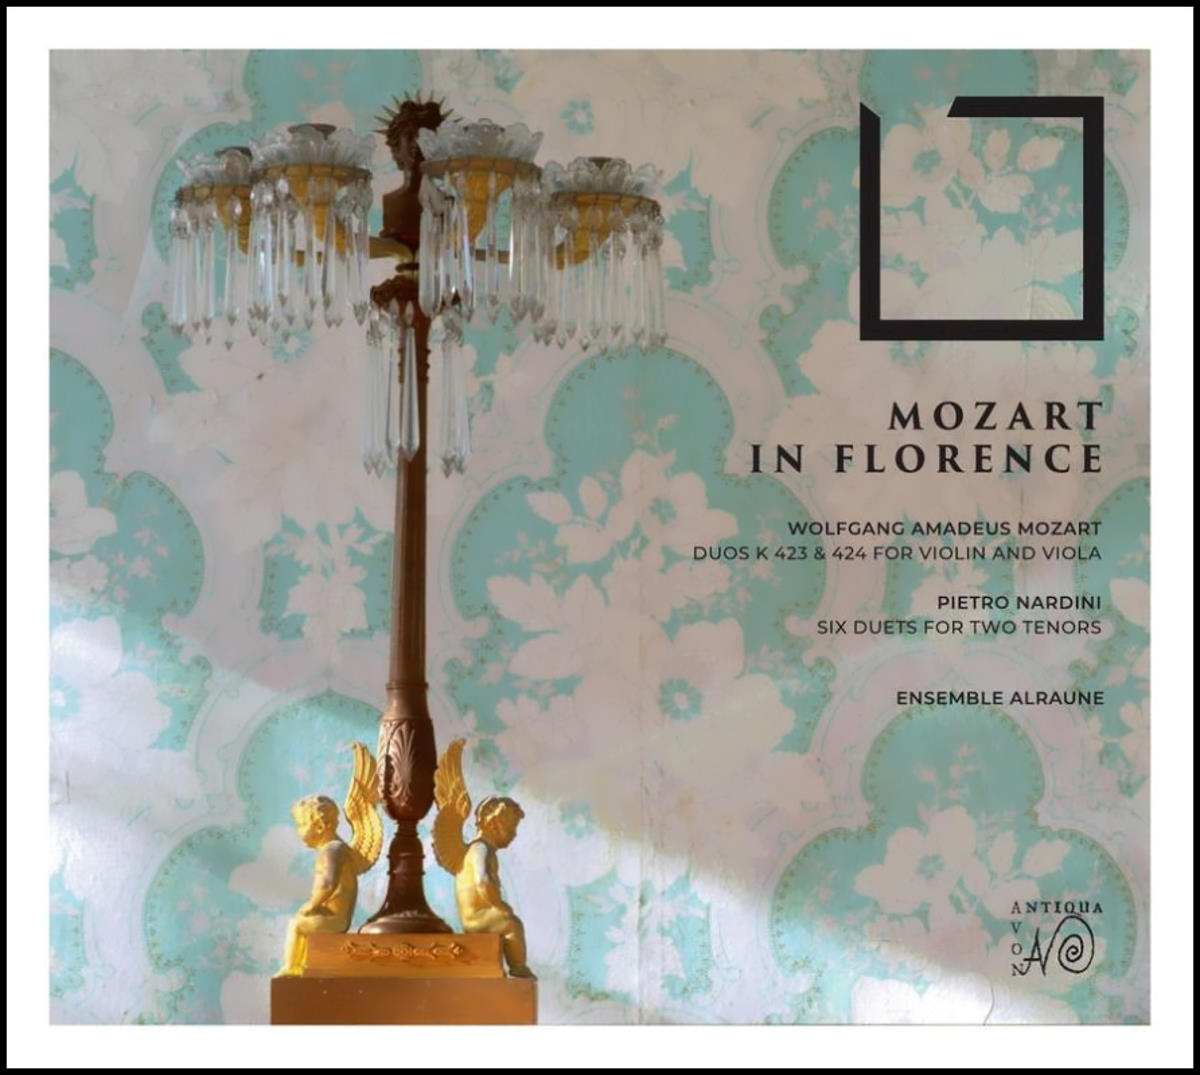 Recensione CD - Mozart in Florence